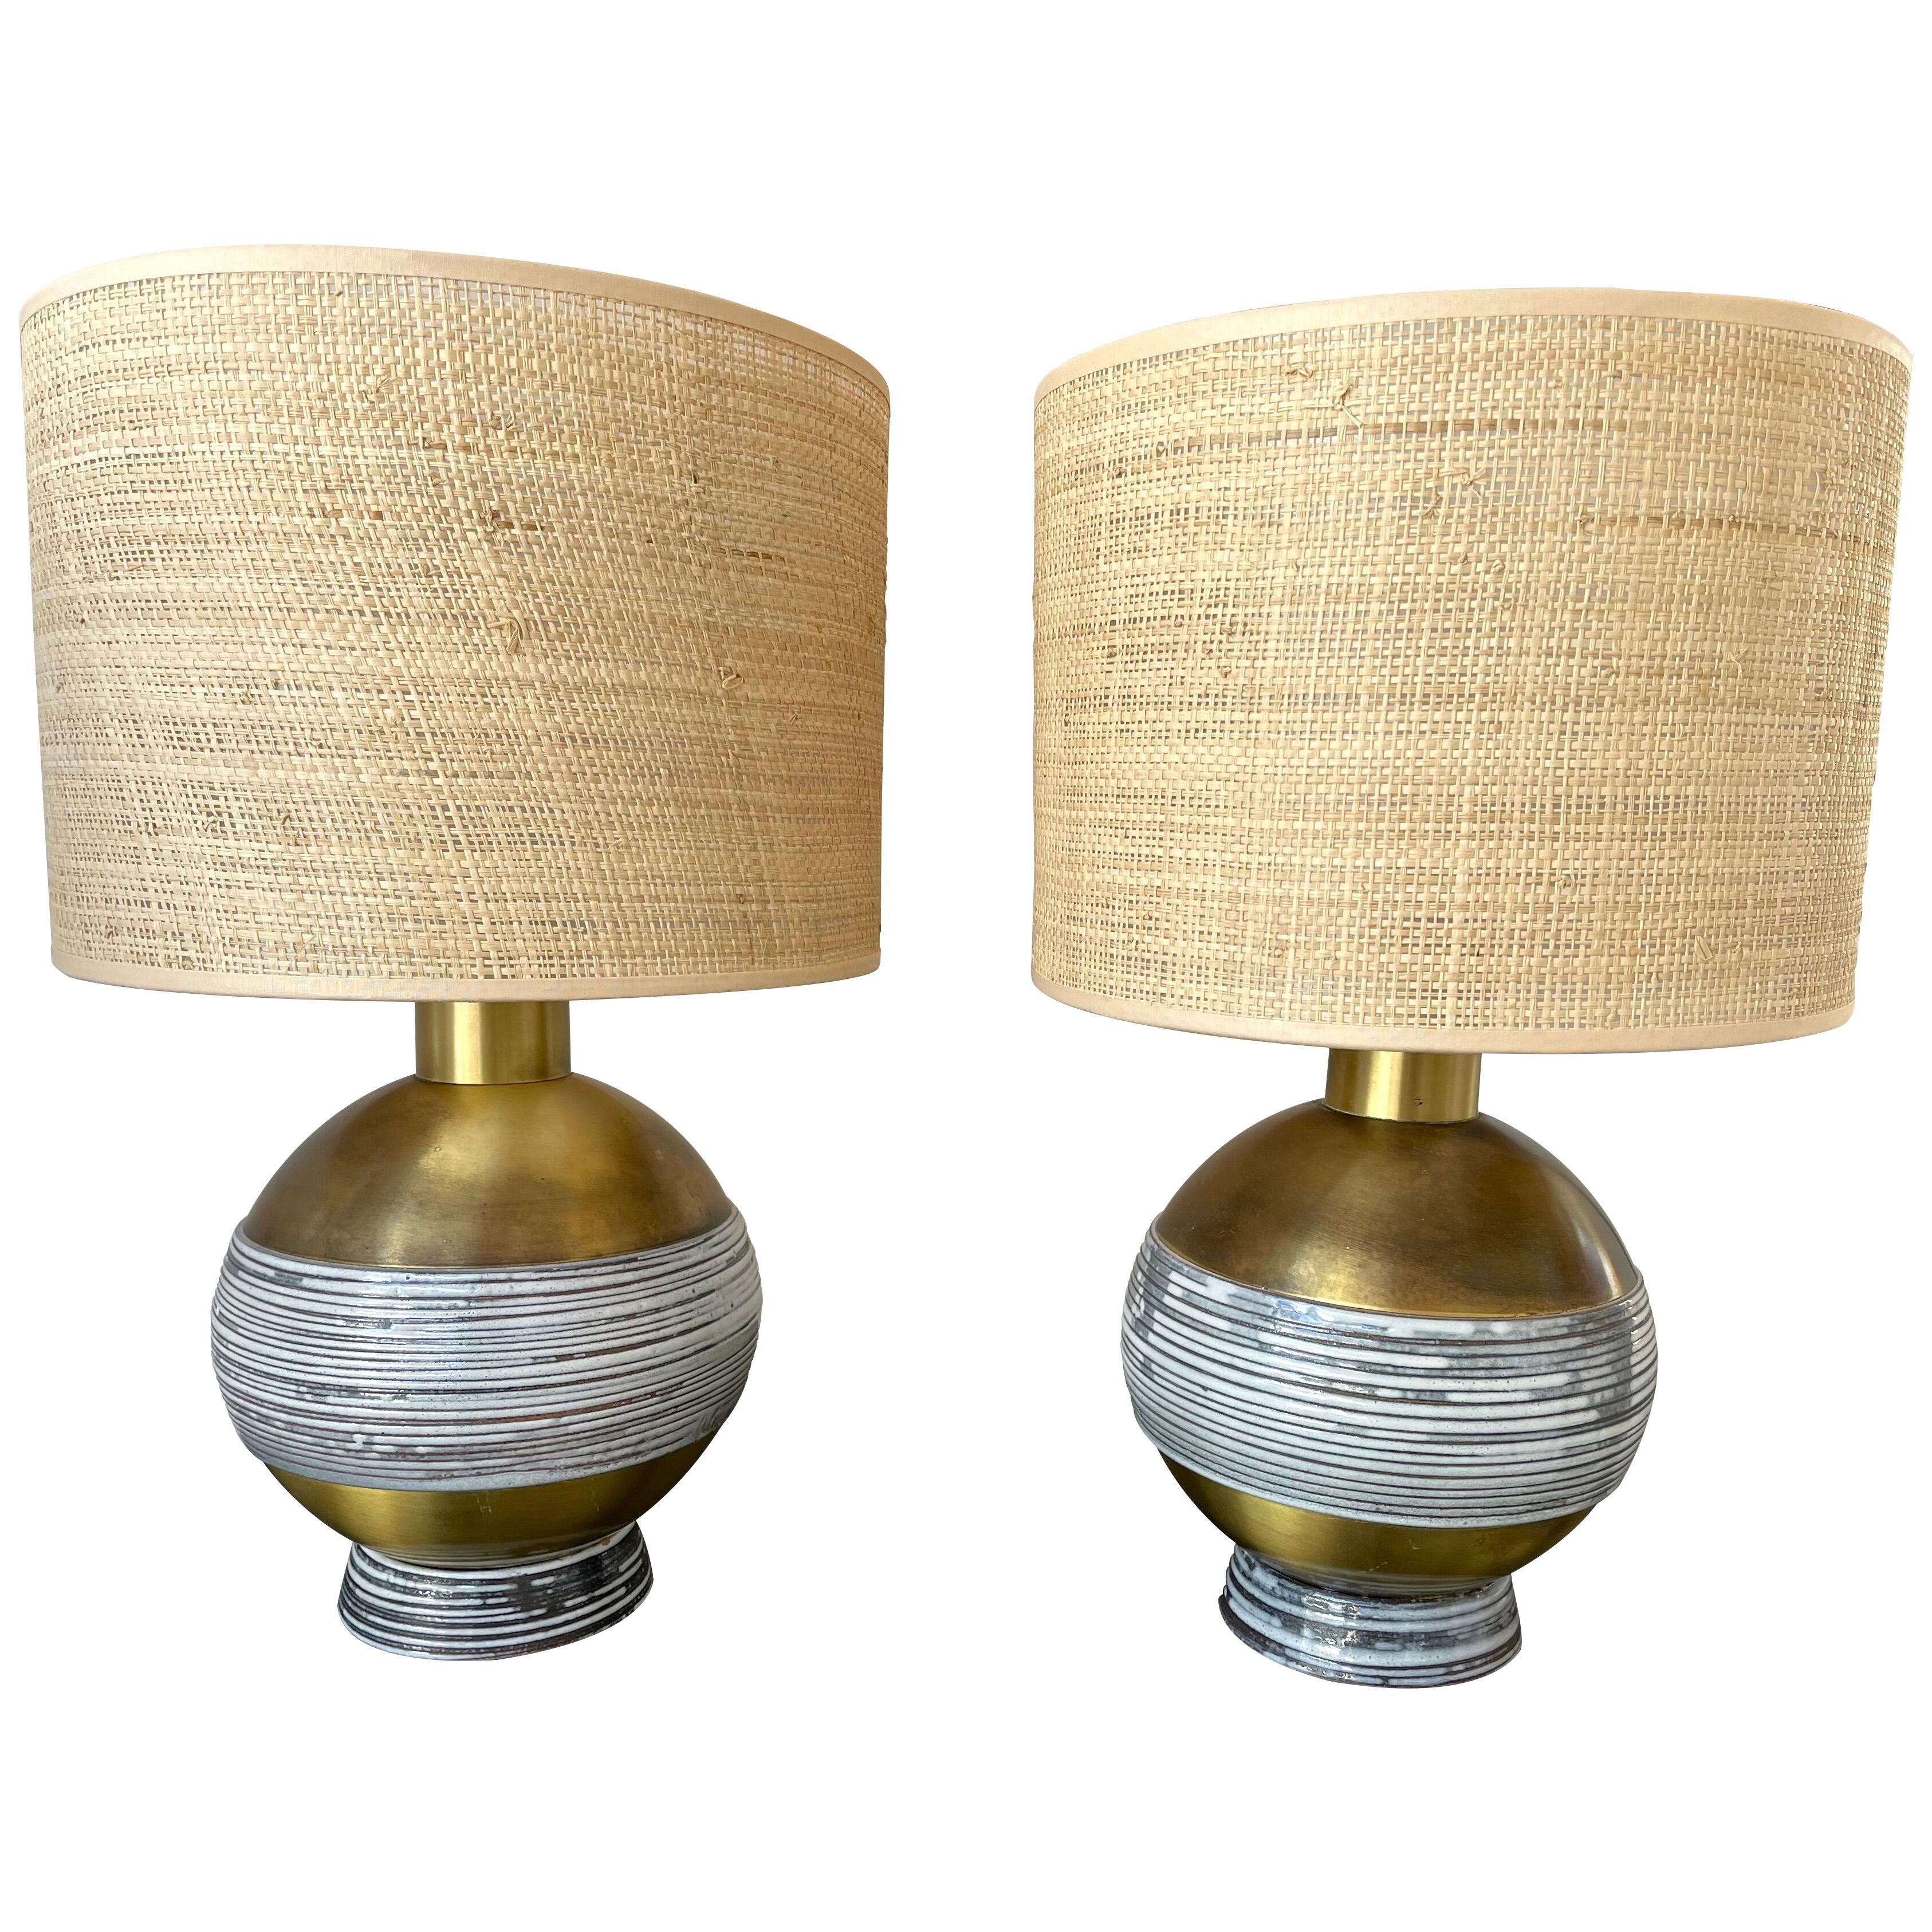 Pair of Brass and Ceramic Lamps. Italy, 1970s